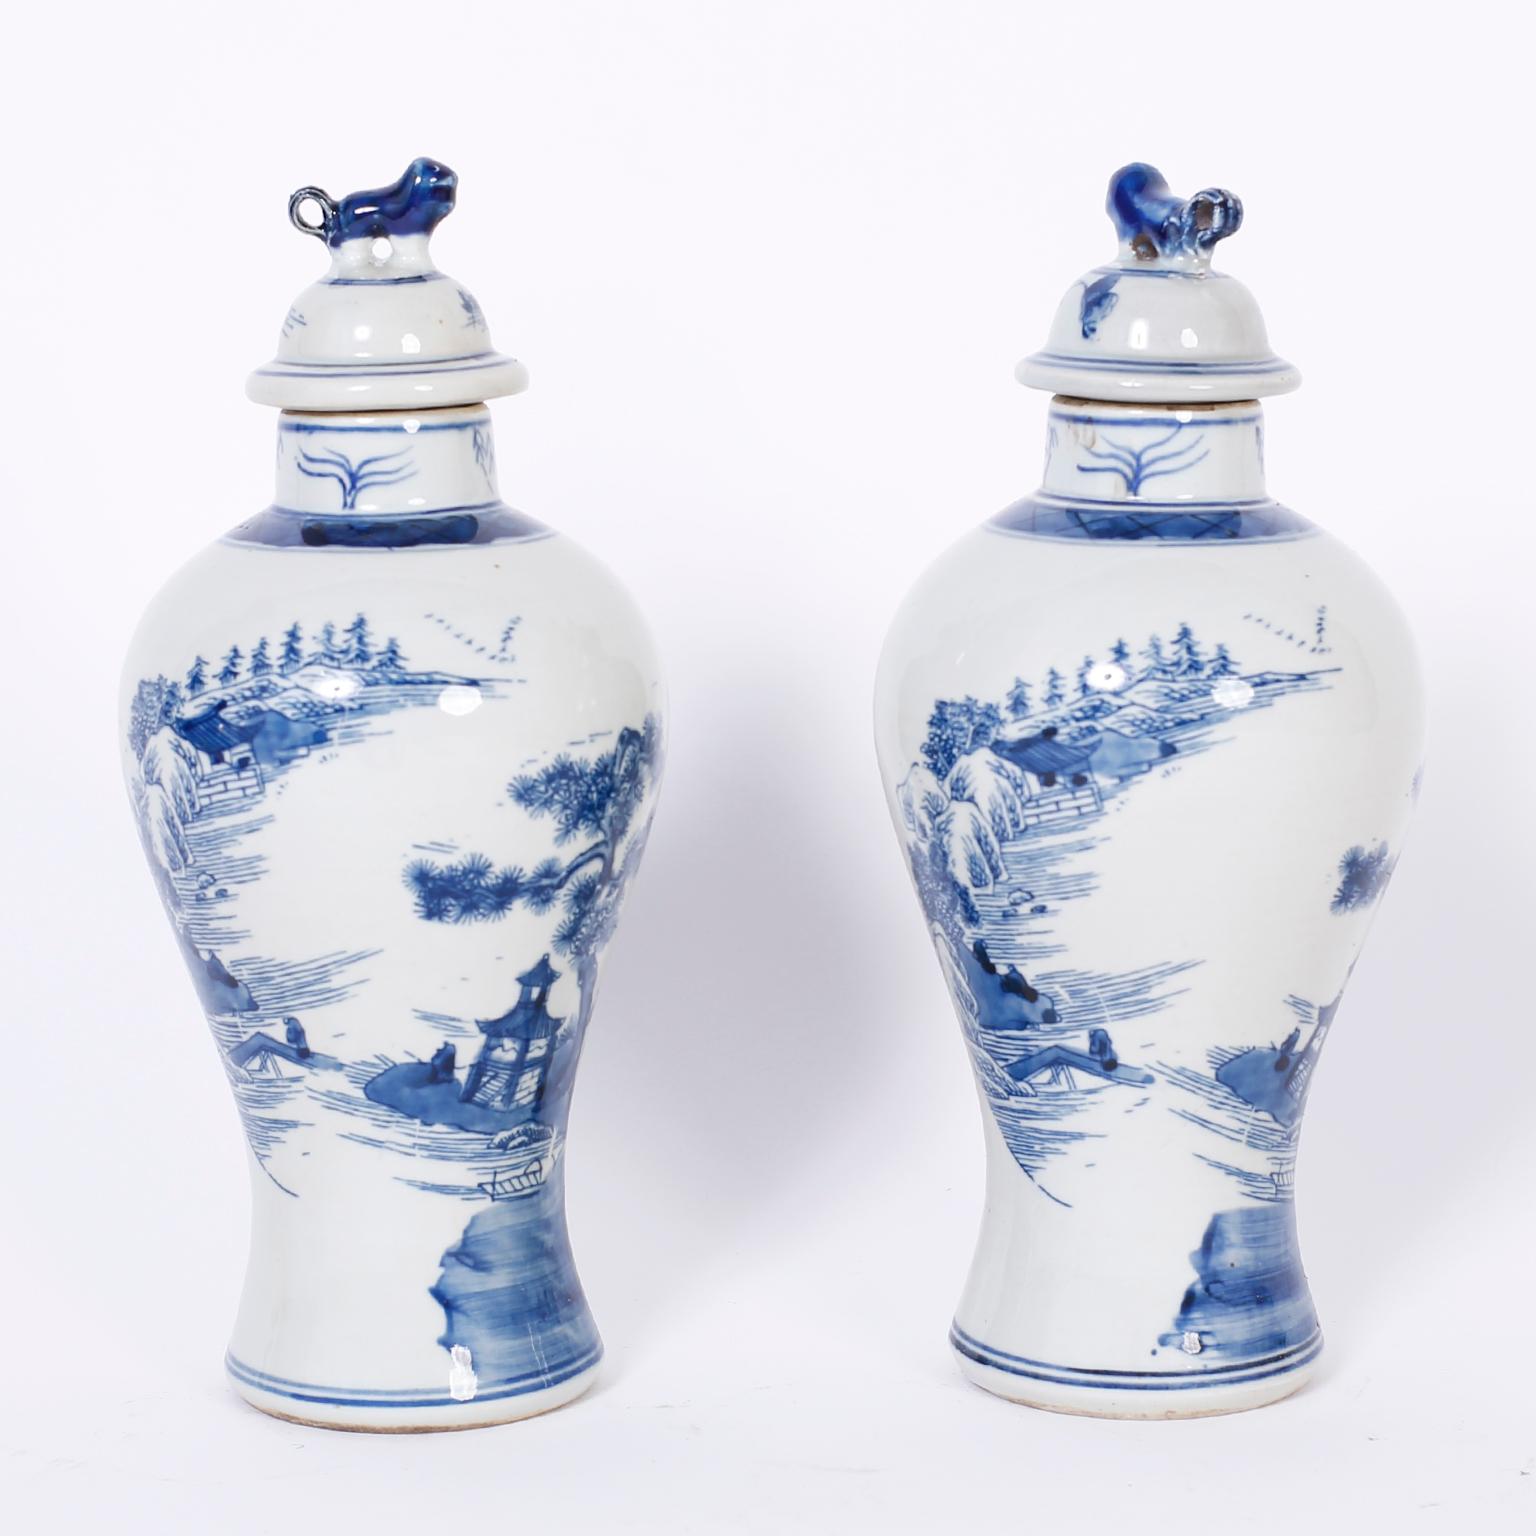 Pair of Chinese blue and white porcelain jars with foo dog handles and hand decorated with architectural landscapes all around.